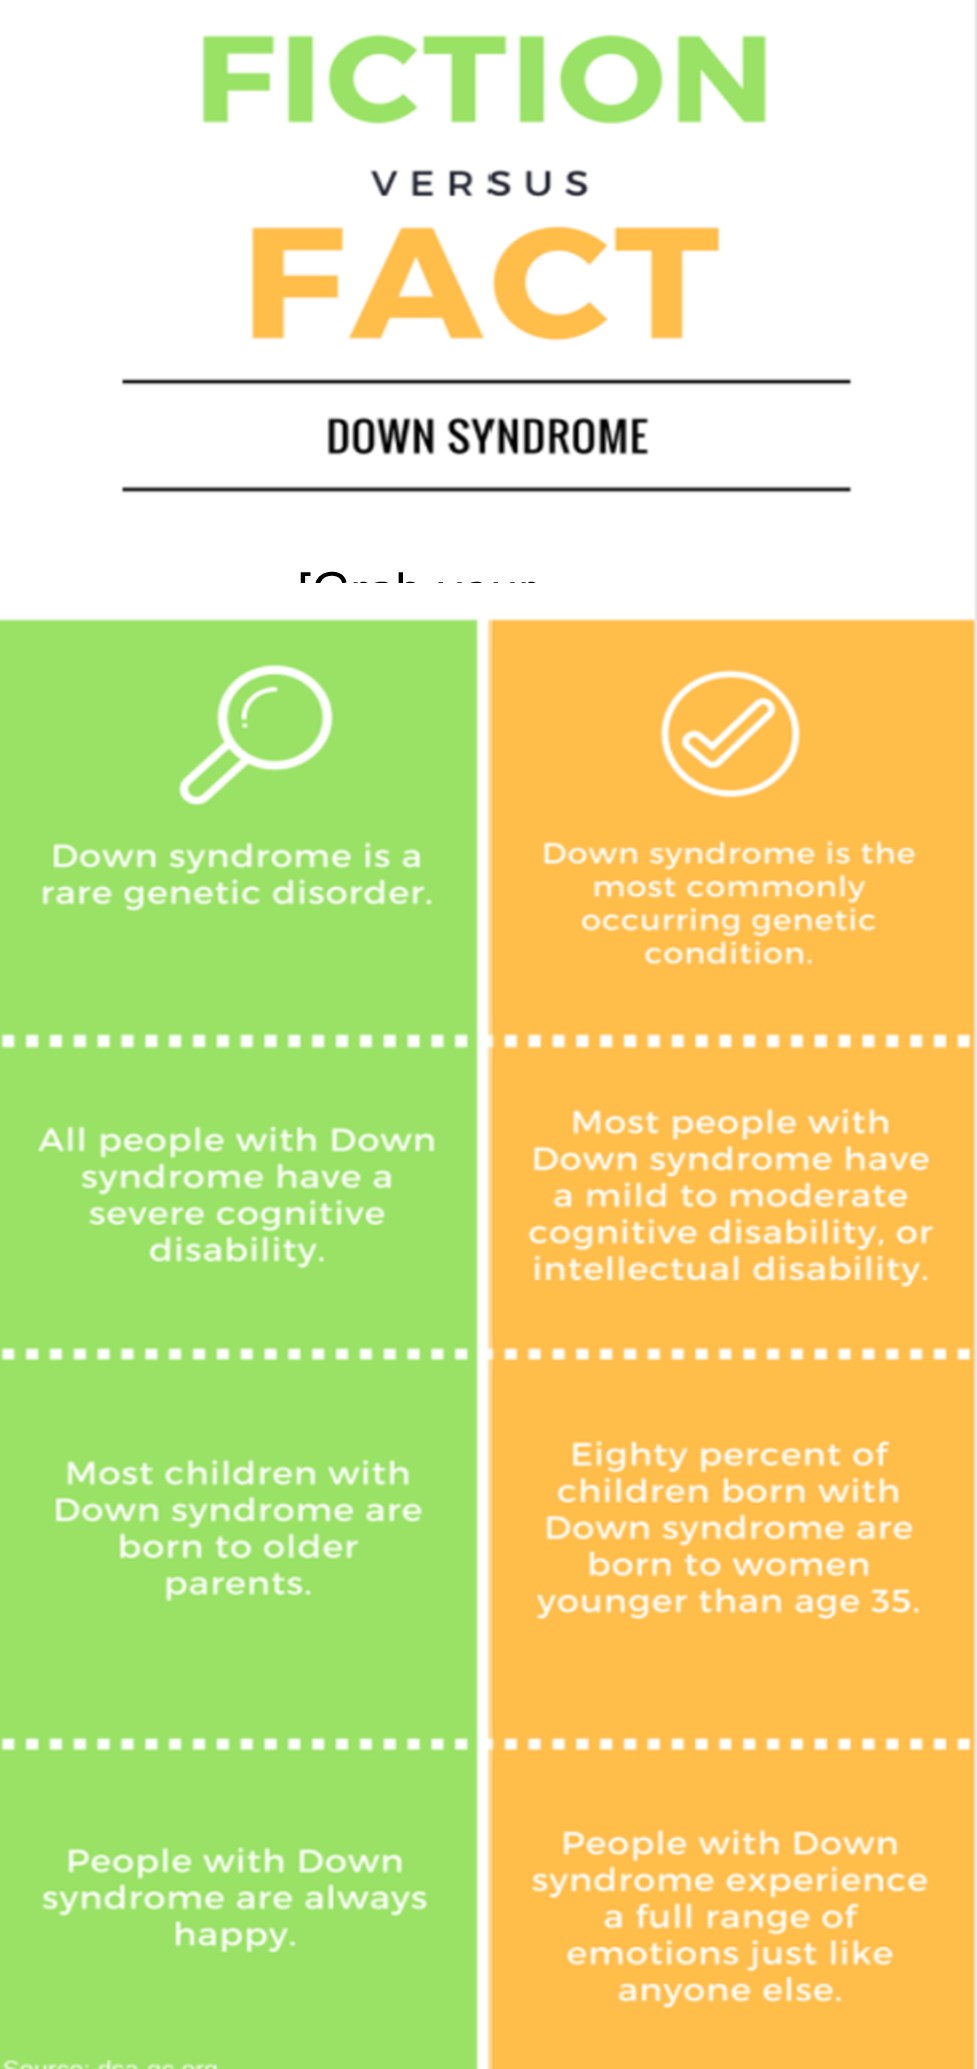 Down syndrome myths and facts